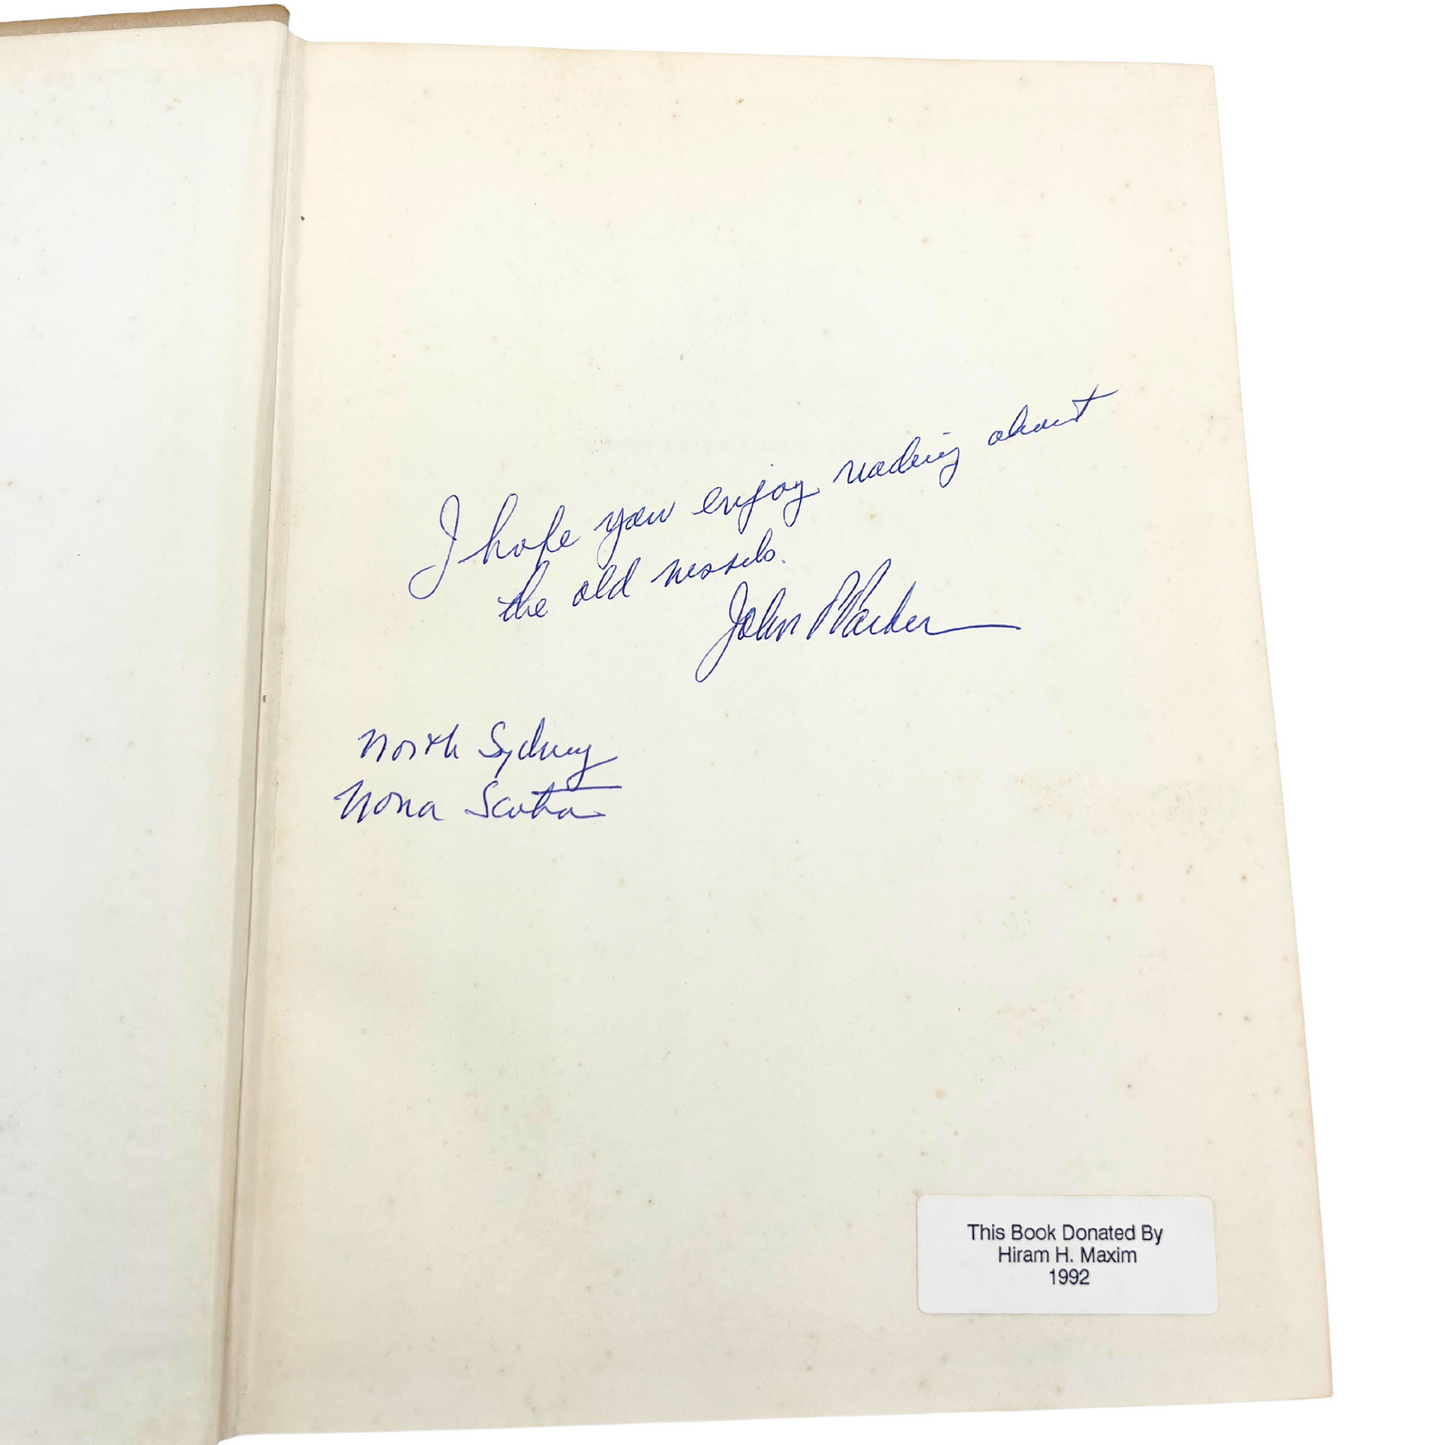 1960 book: Sails of the Maritimes (signed copy)